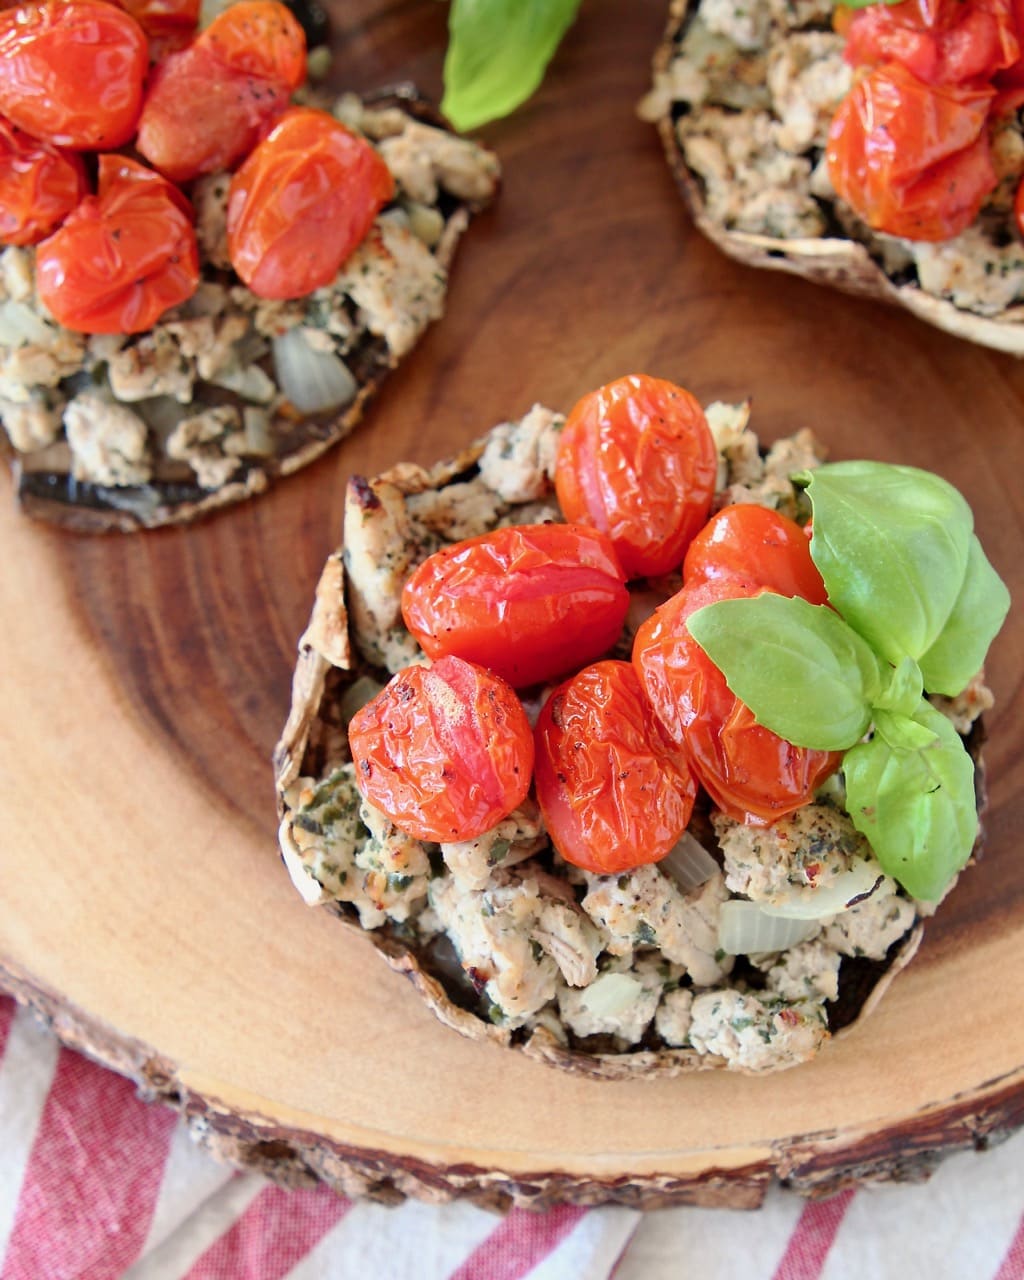 Overhead shot of stuffed portobello mushrooms filled with ground turkey, cherry tomatoes and fresh basil leaves, sitting on a round, raw edge wood cutting board, sitting on a red and white striped towel